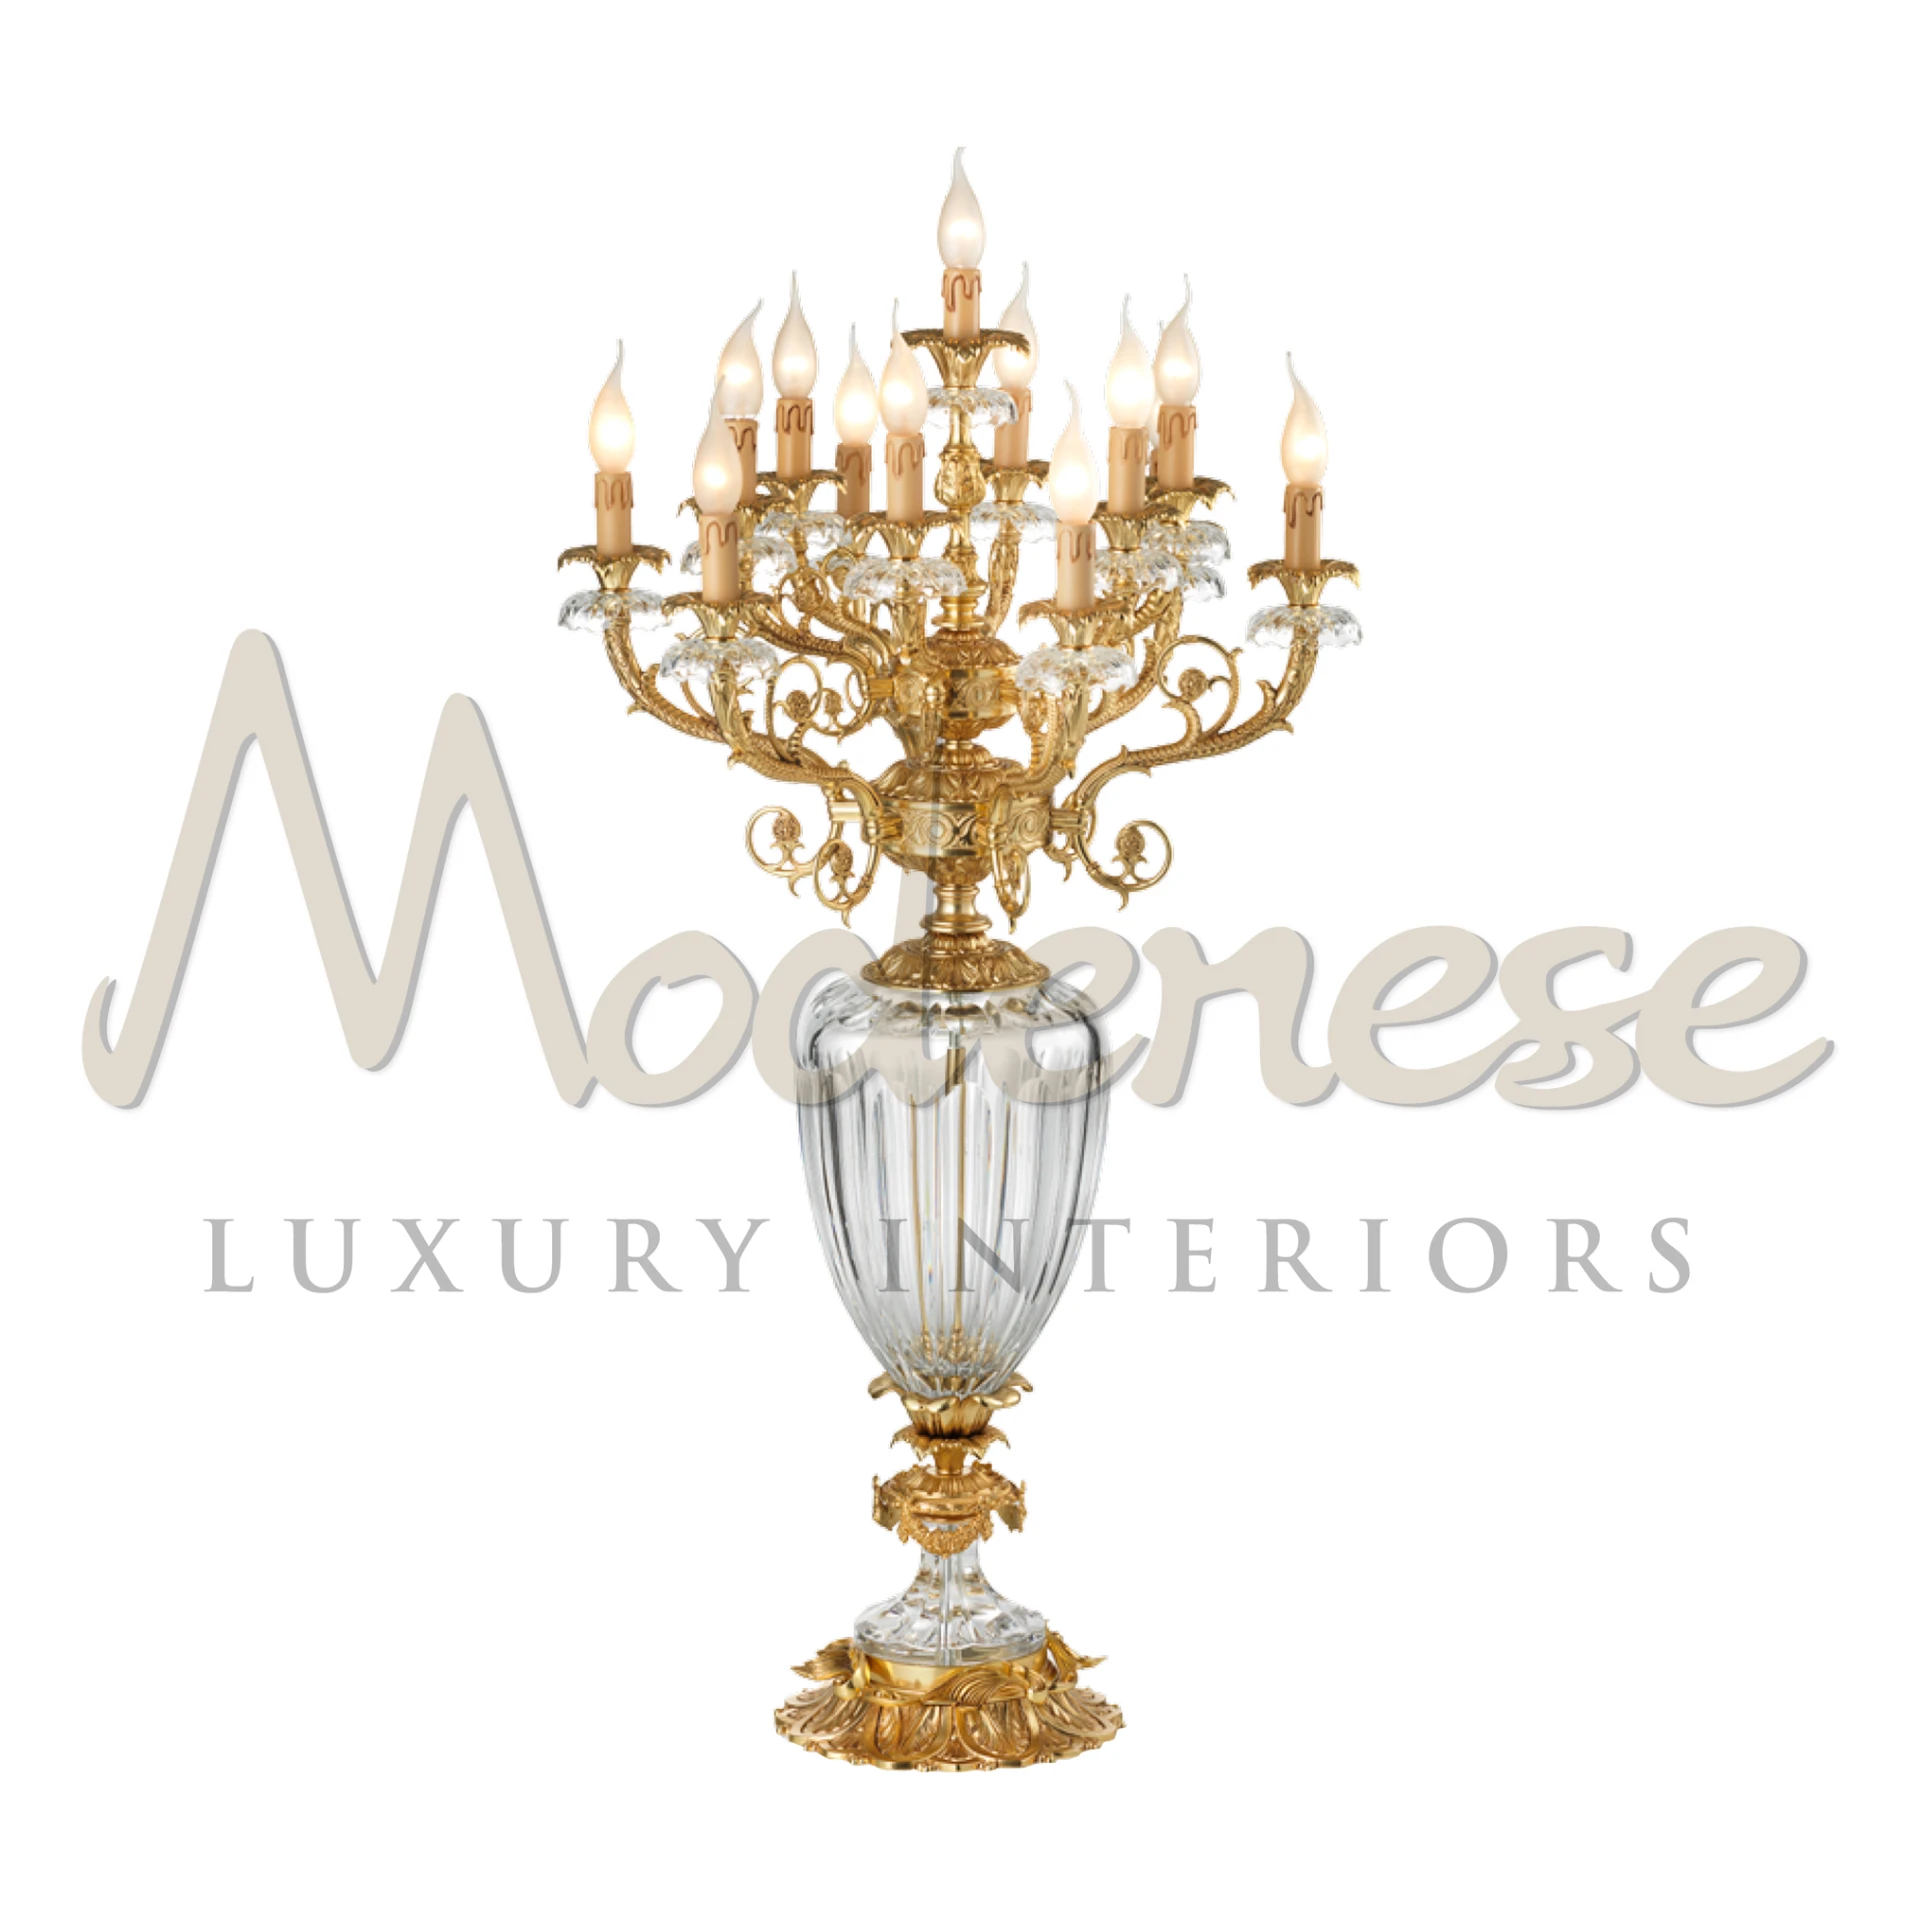 Imperial Majesty Luminaire with golden candelabra arms and stylish candle-like bulbs.